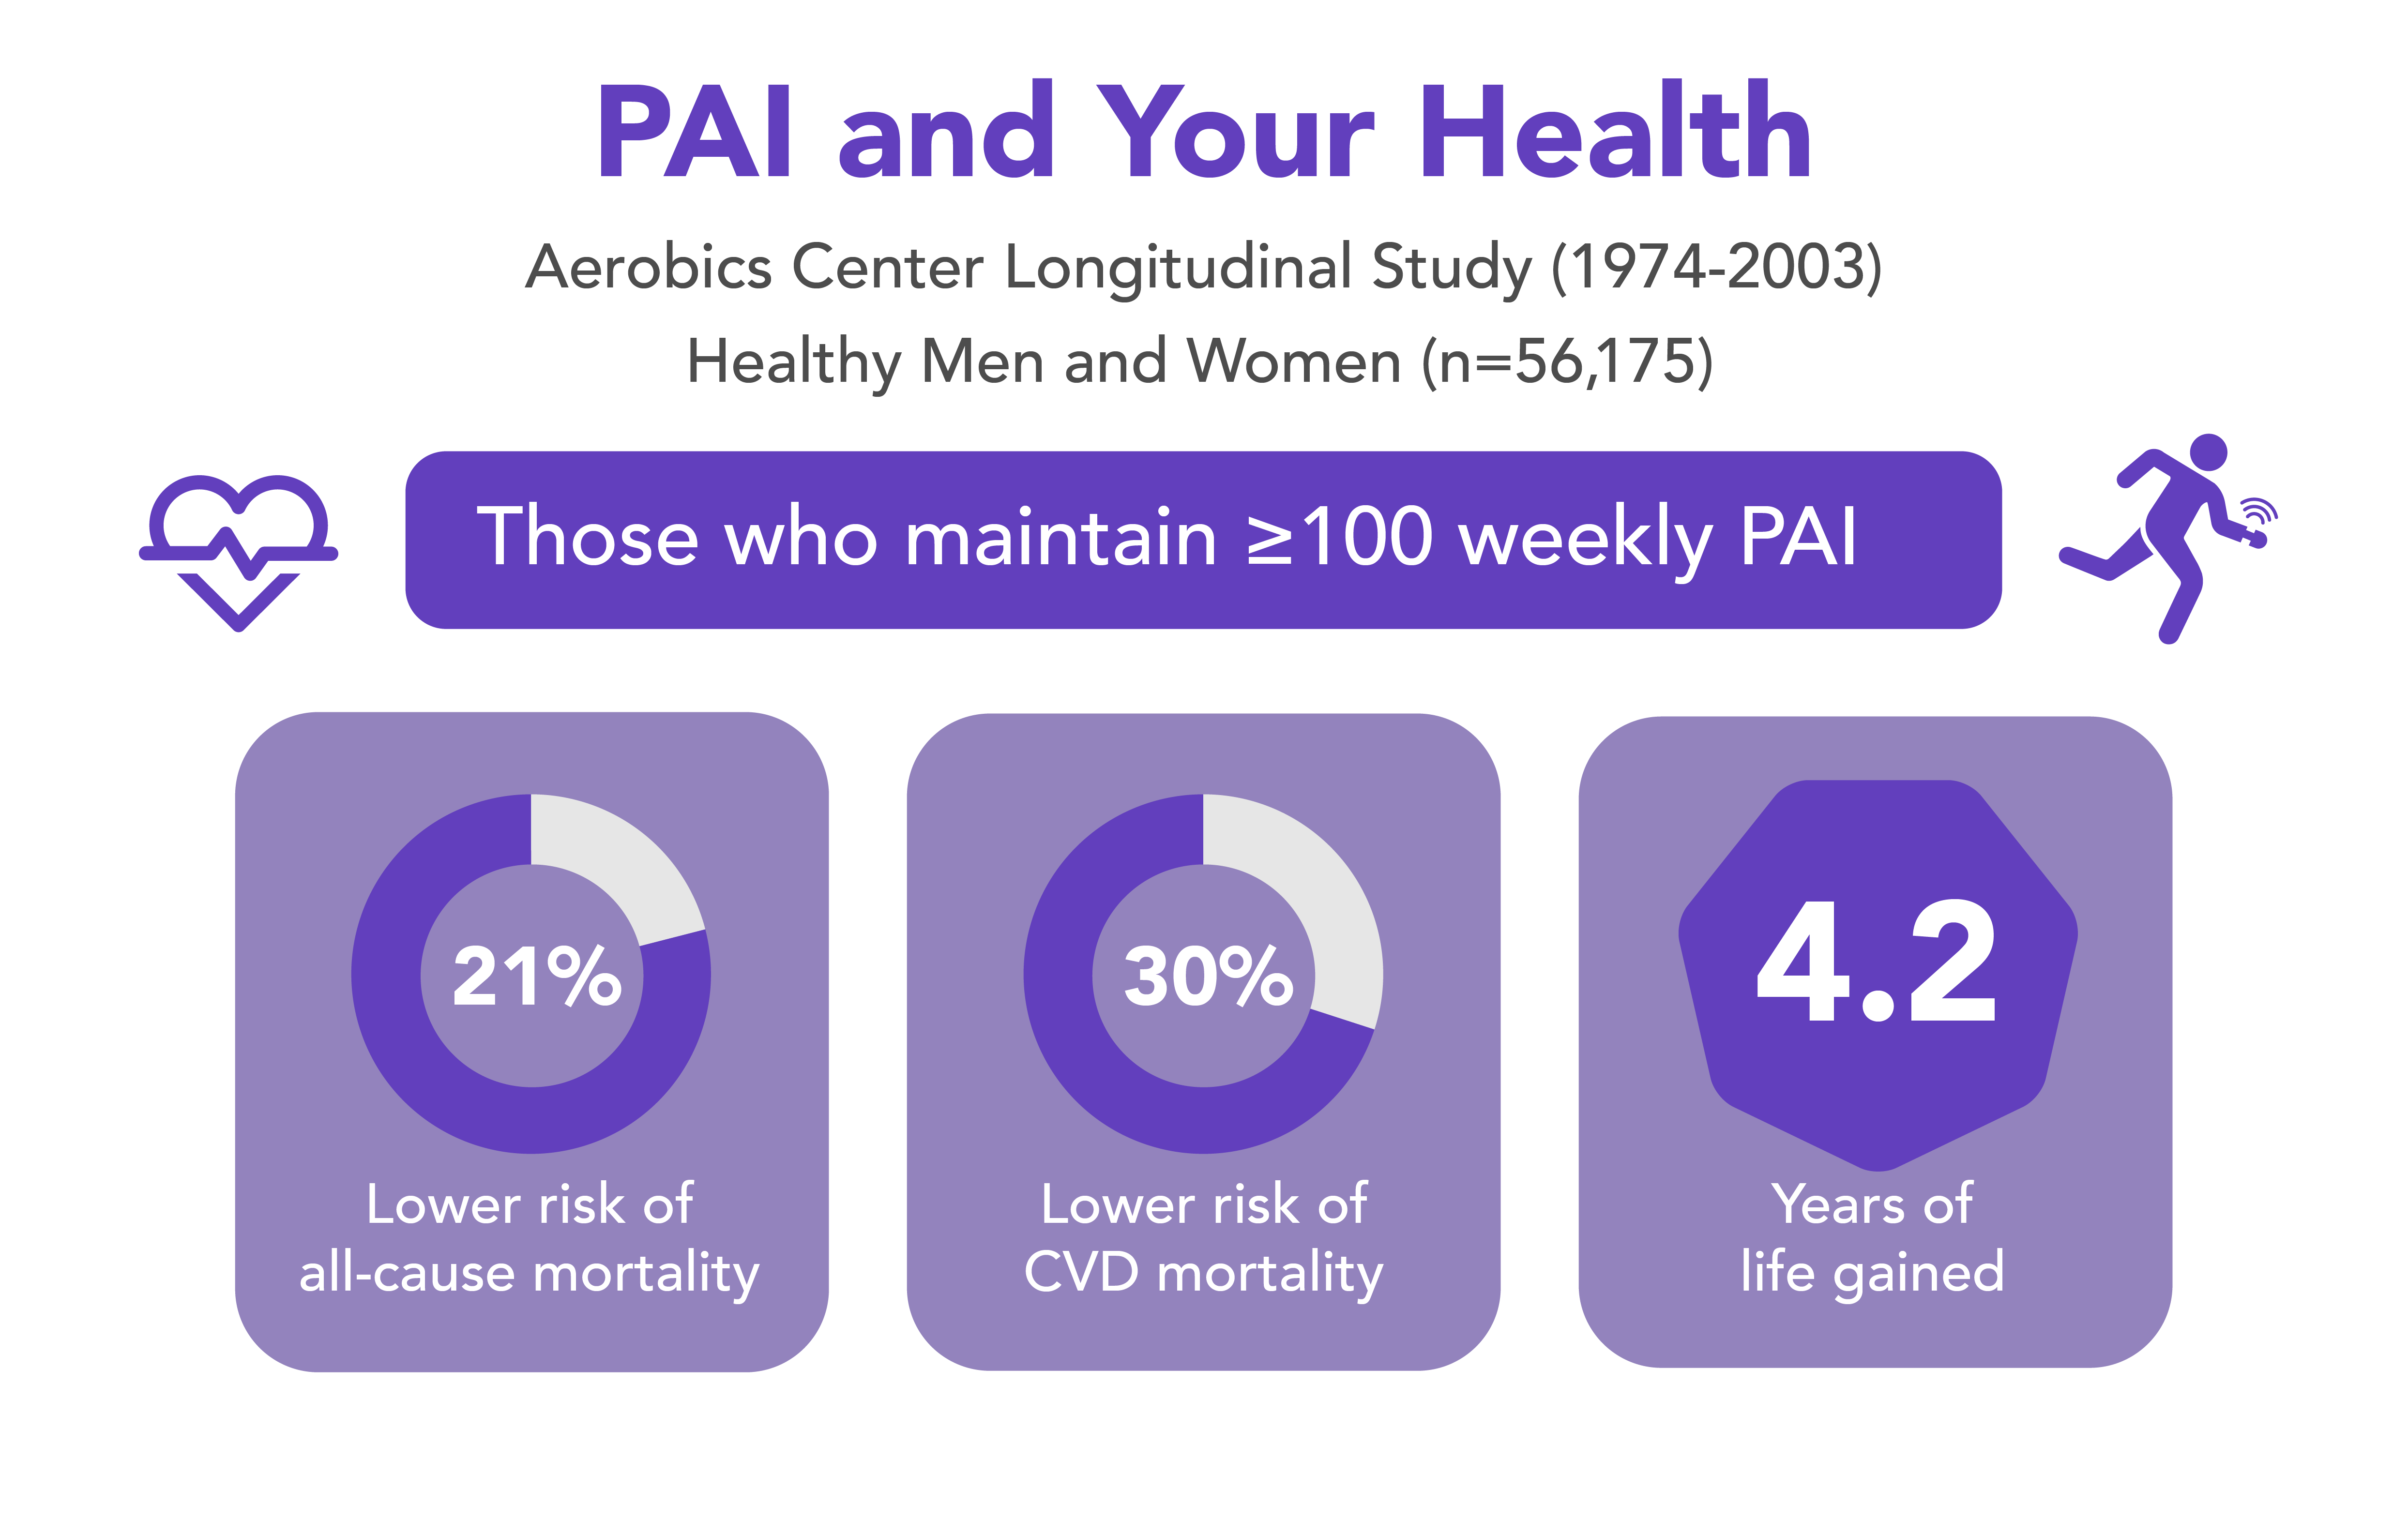 Personal Activity Intelligence (PAI) and Your Health